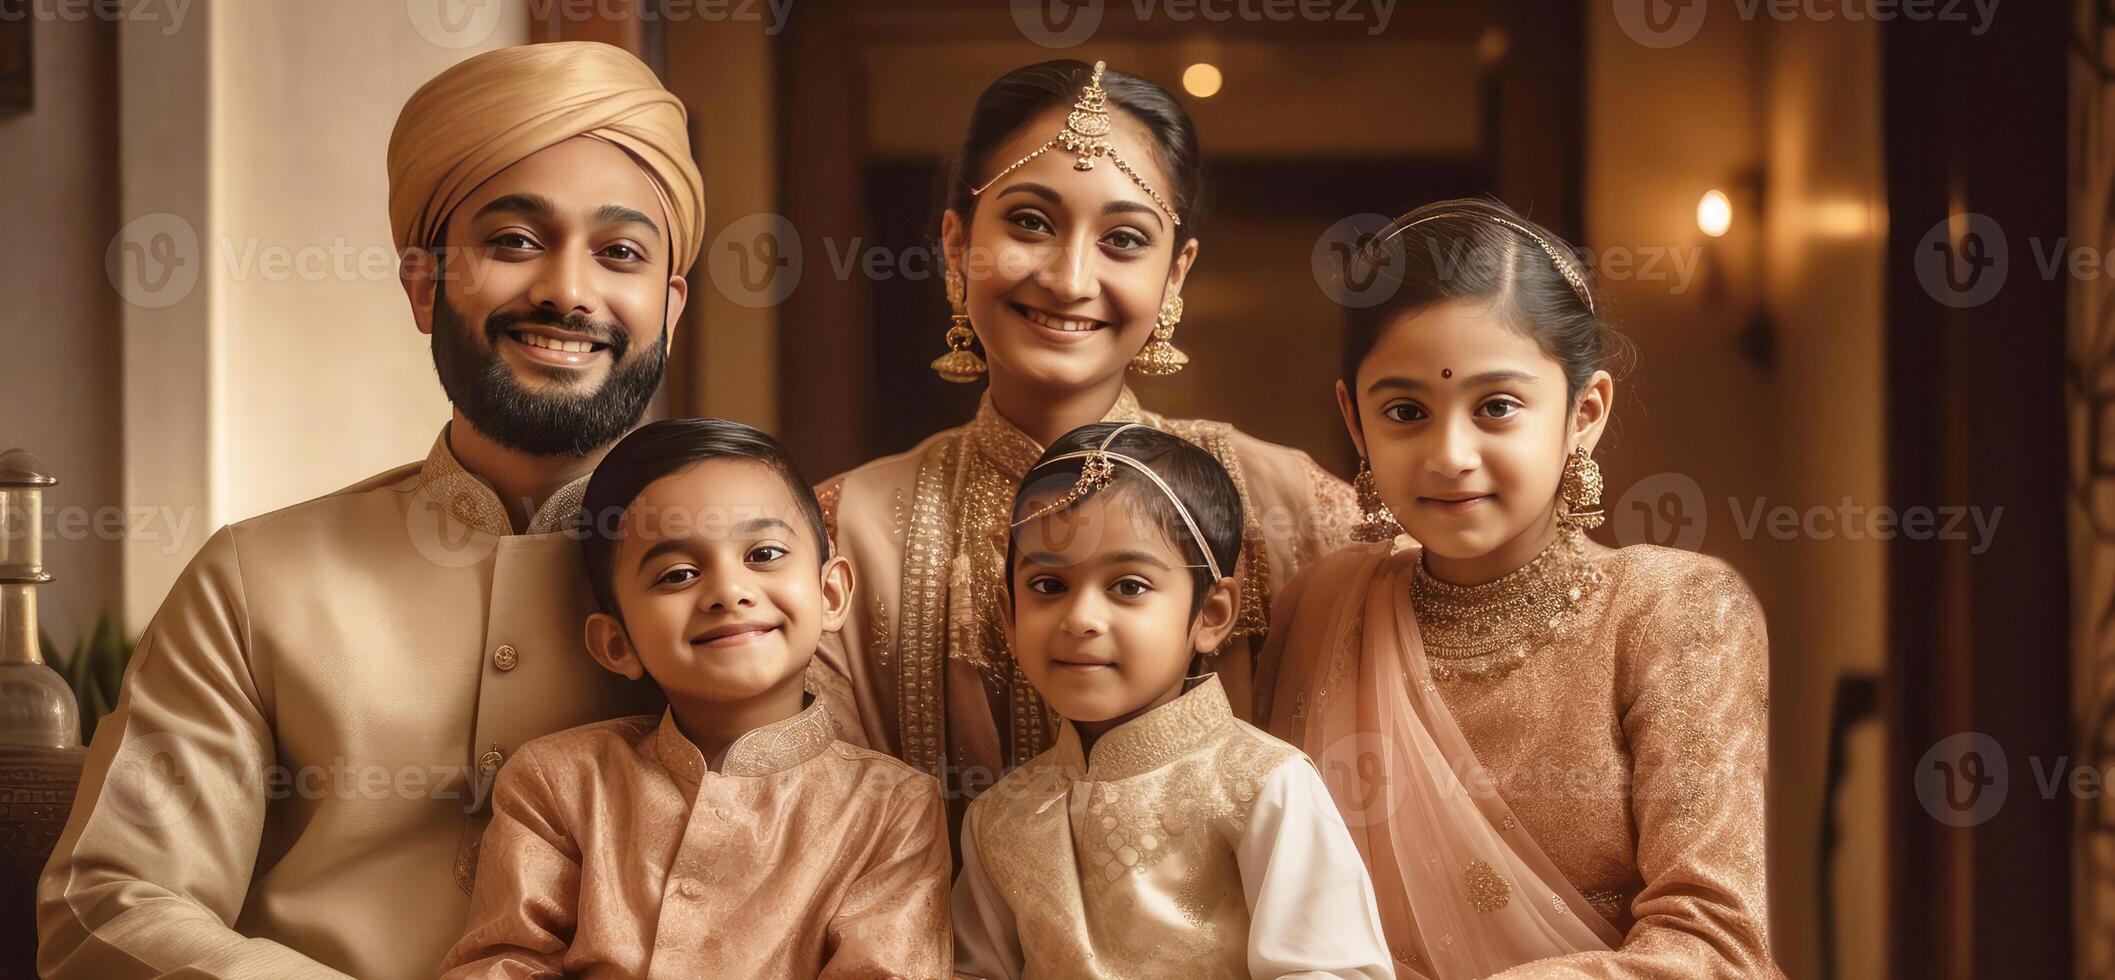 Realistic Portrait of Happy Indian Family Together During Ceremony, . photo